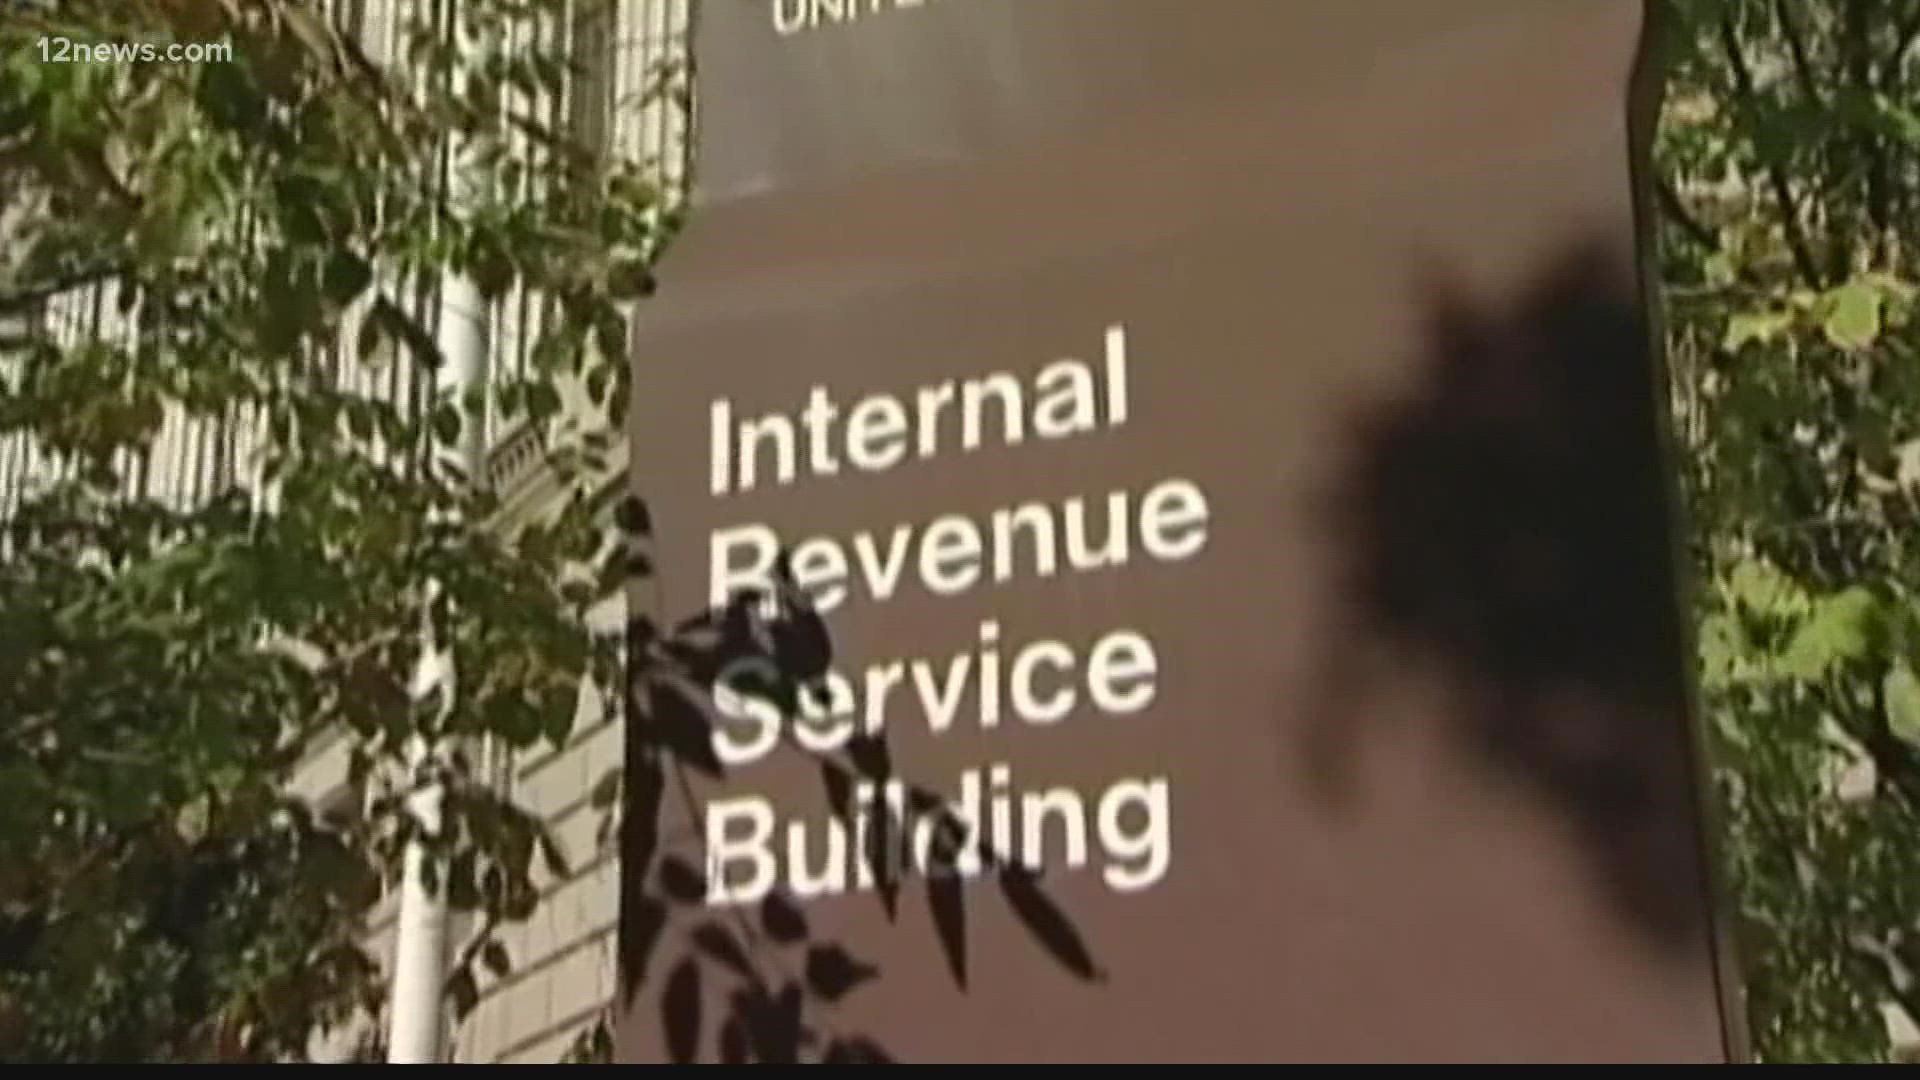 This tax season starts with a warning: expect frustrations and delays. The head of the IRS is citing staffing shortages as one of the reasons for a backlog.